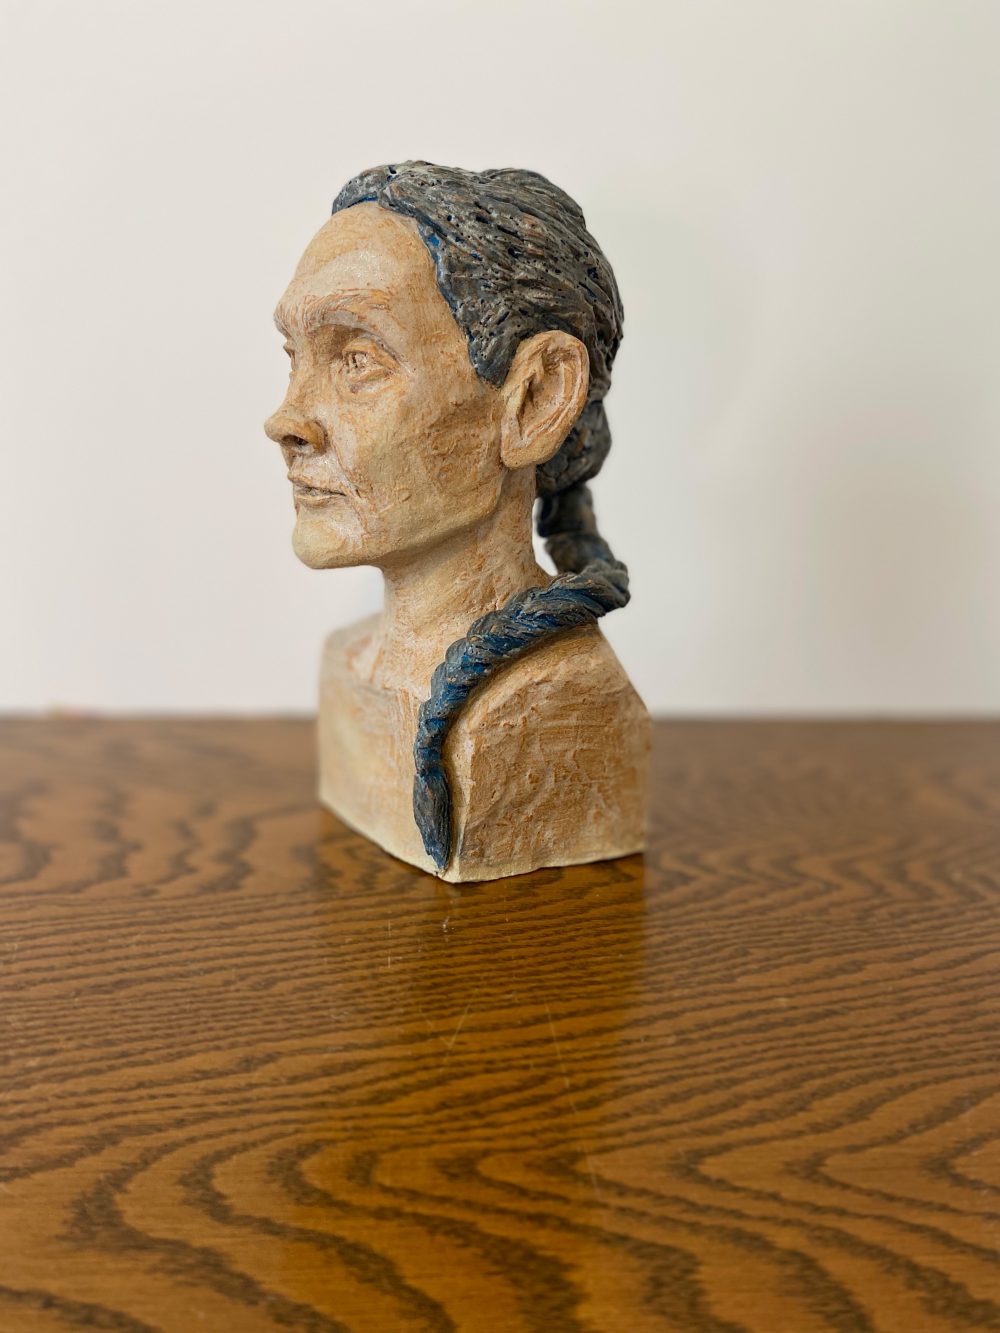 Ceramic representation of a middle aged person with a blank gaze and a blue braid.